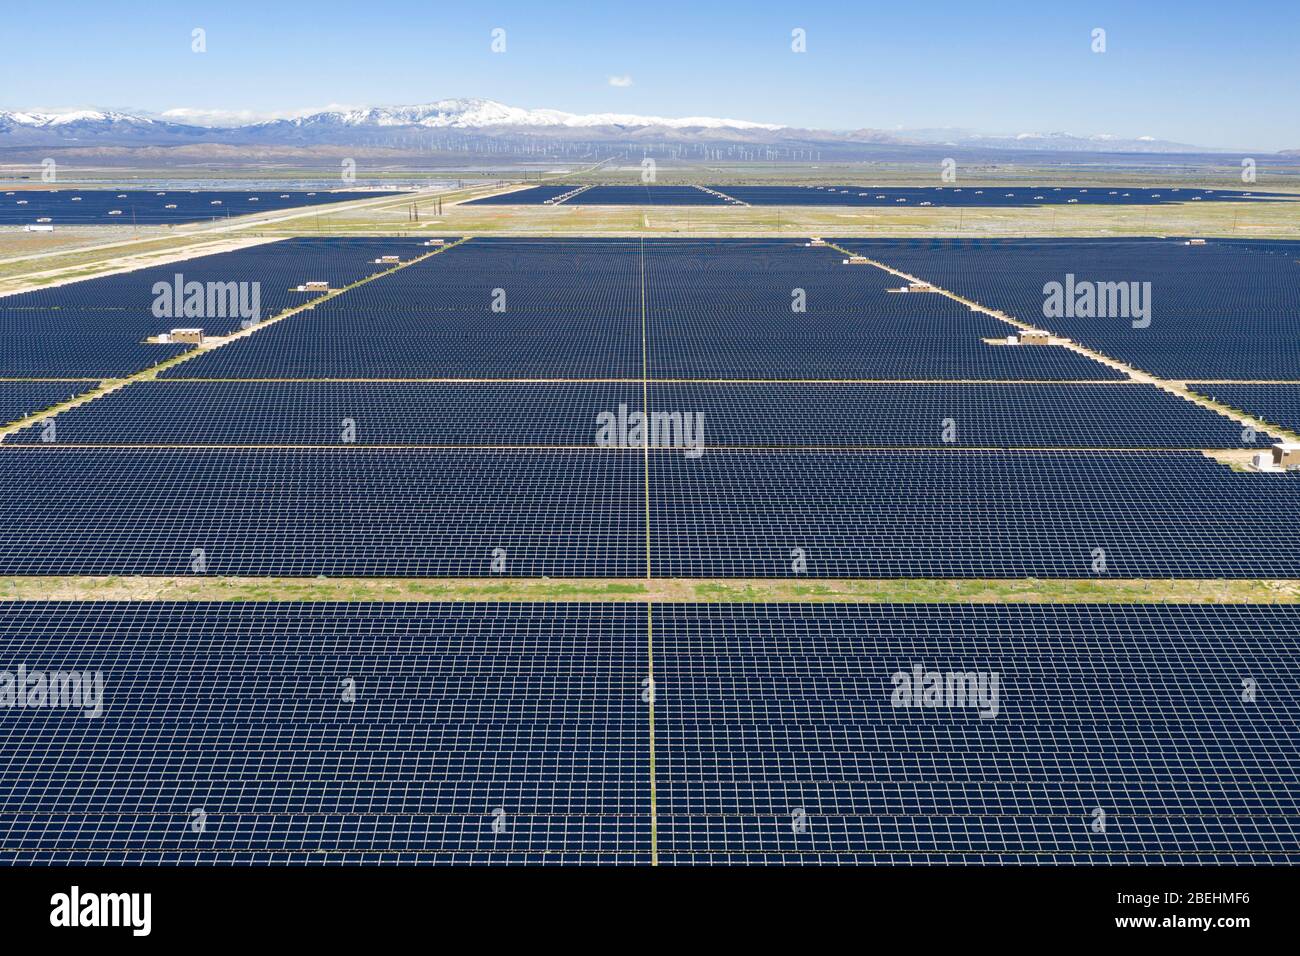 Aerial view of photovoltaic (PV) green solar ranch in the Antelope Valley in the Mojave desert of California Stock Photo